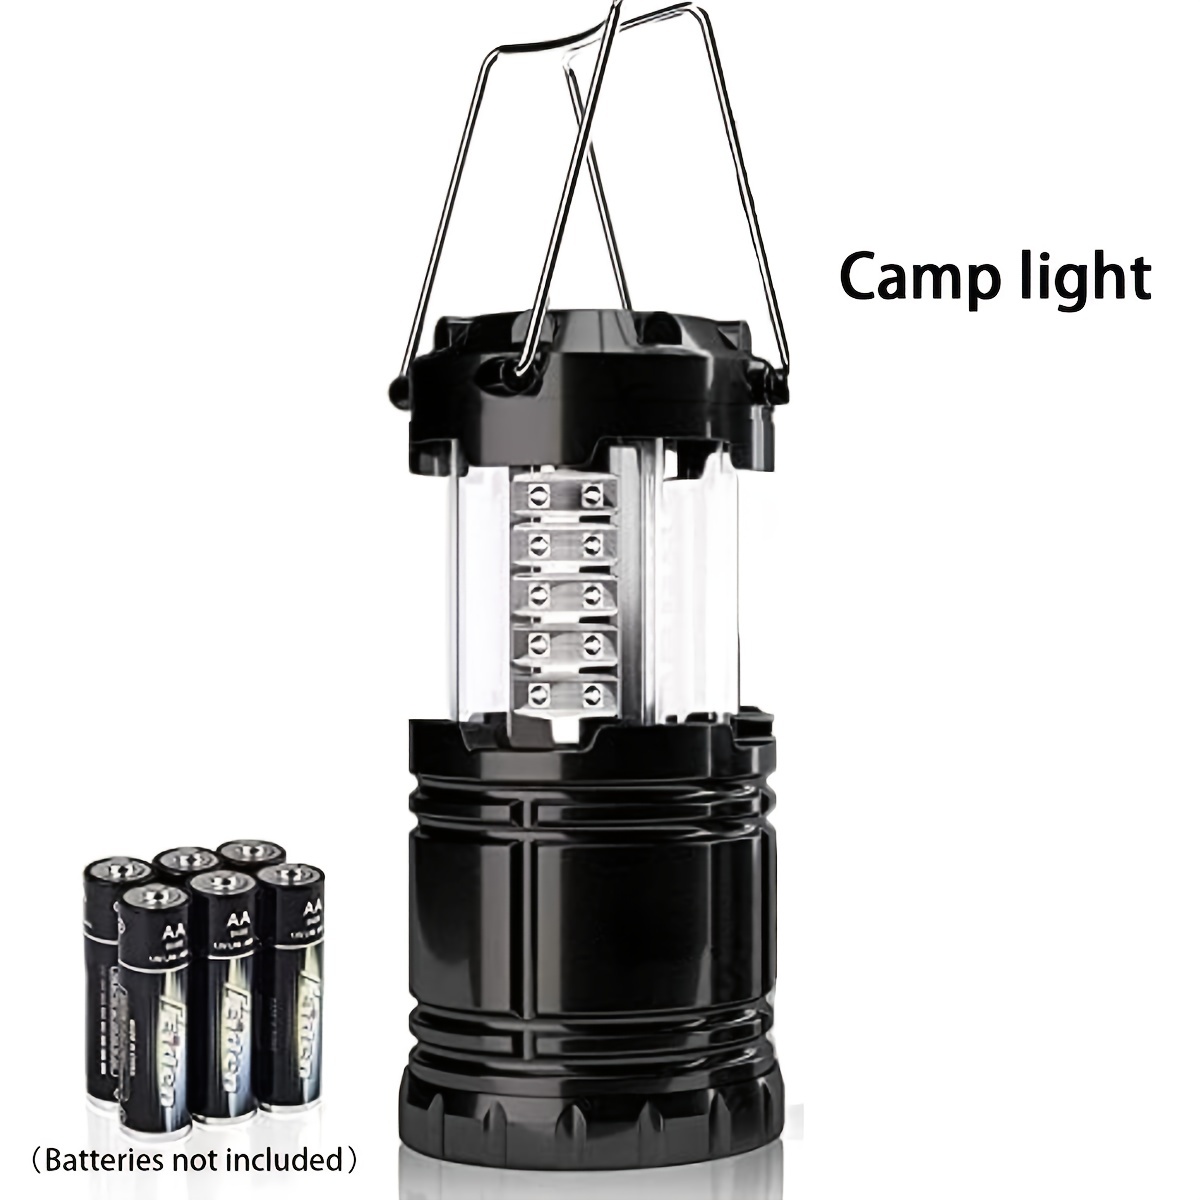  Super Bright Portable Collapsible Camping Lanterns